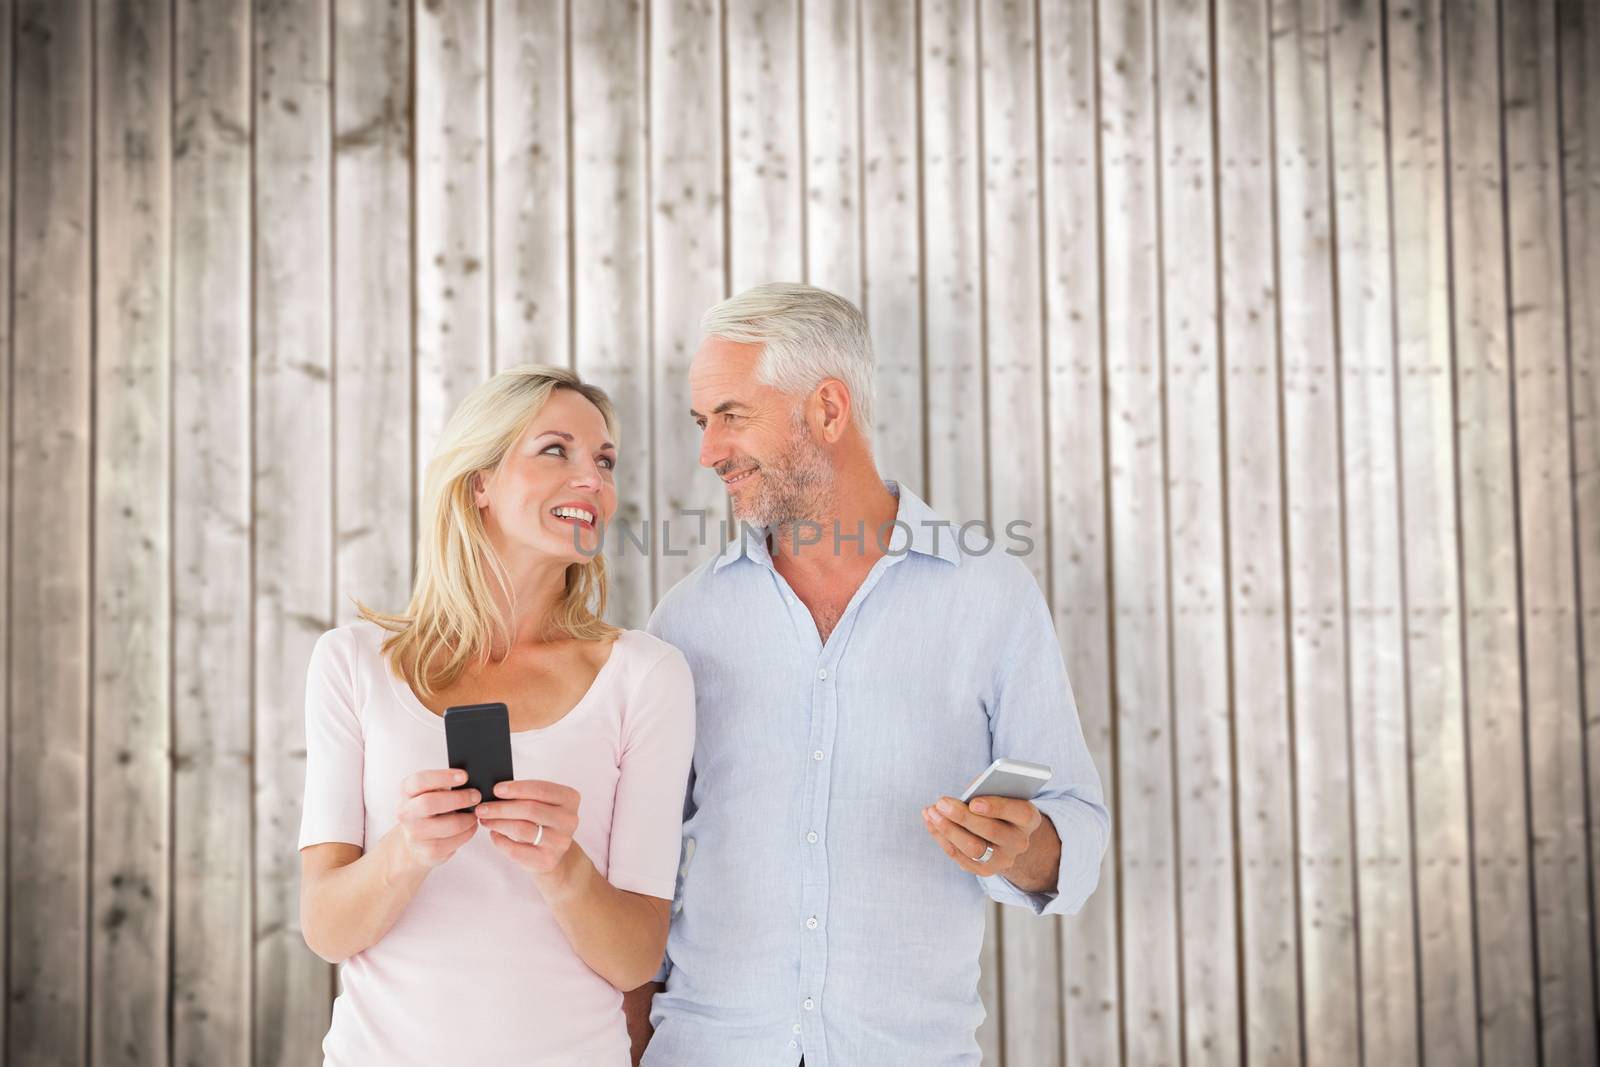 Happy couple texting on their smartphones against wooden planks background